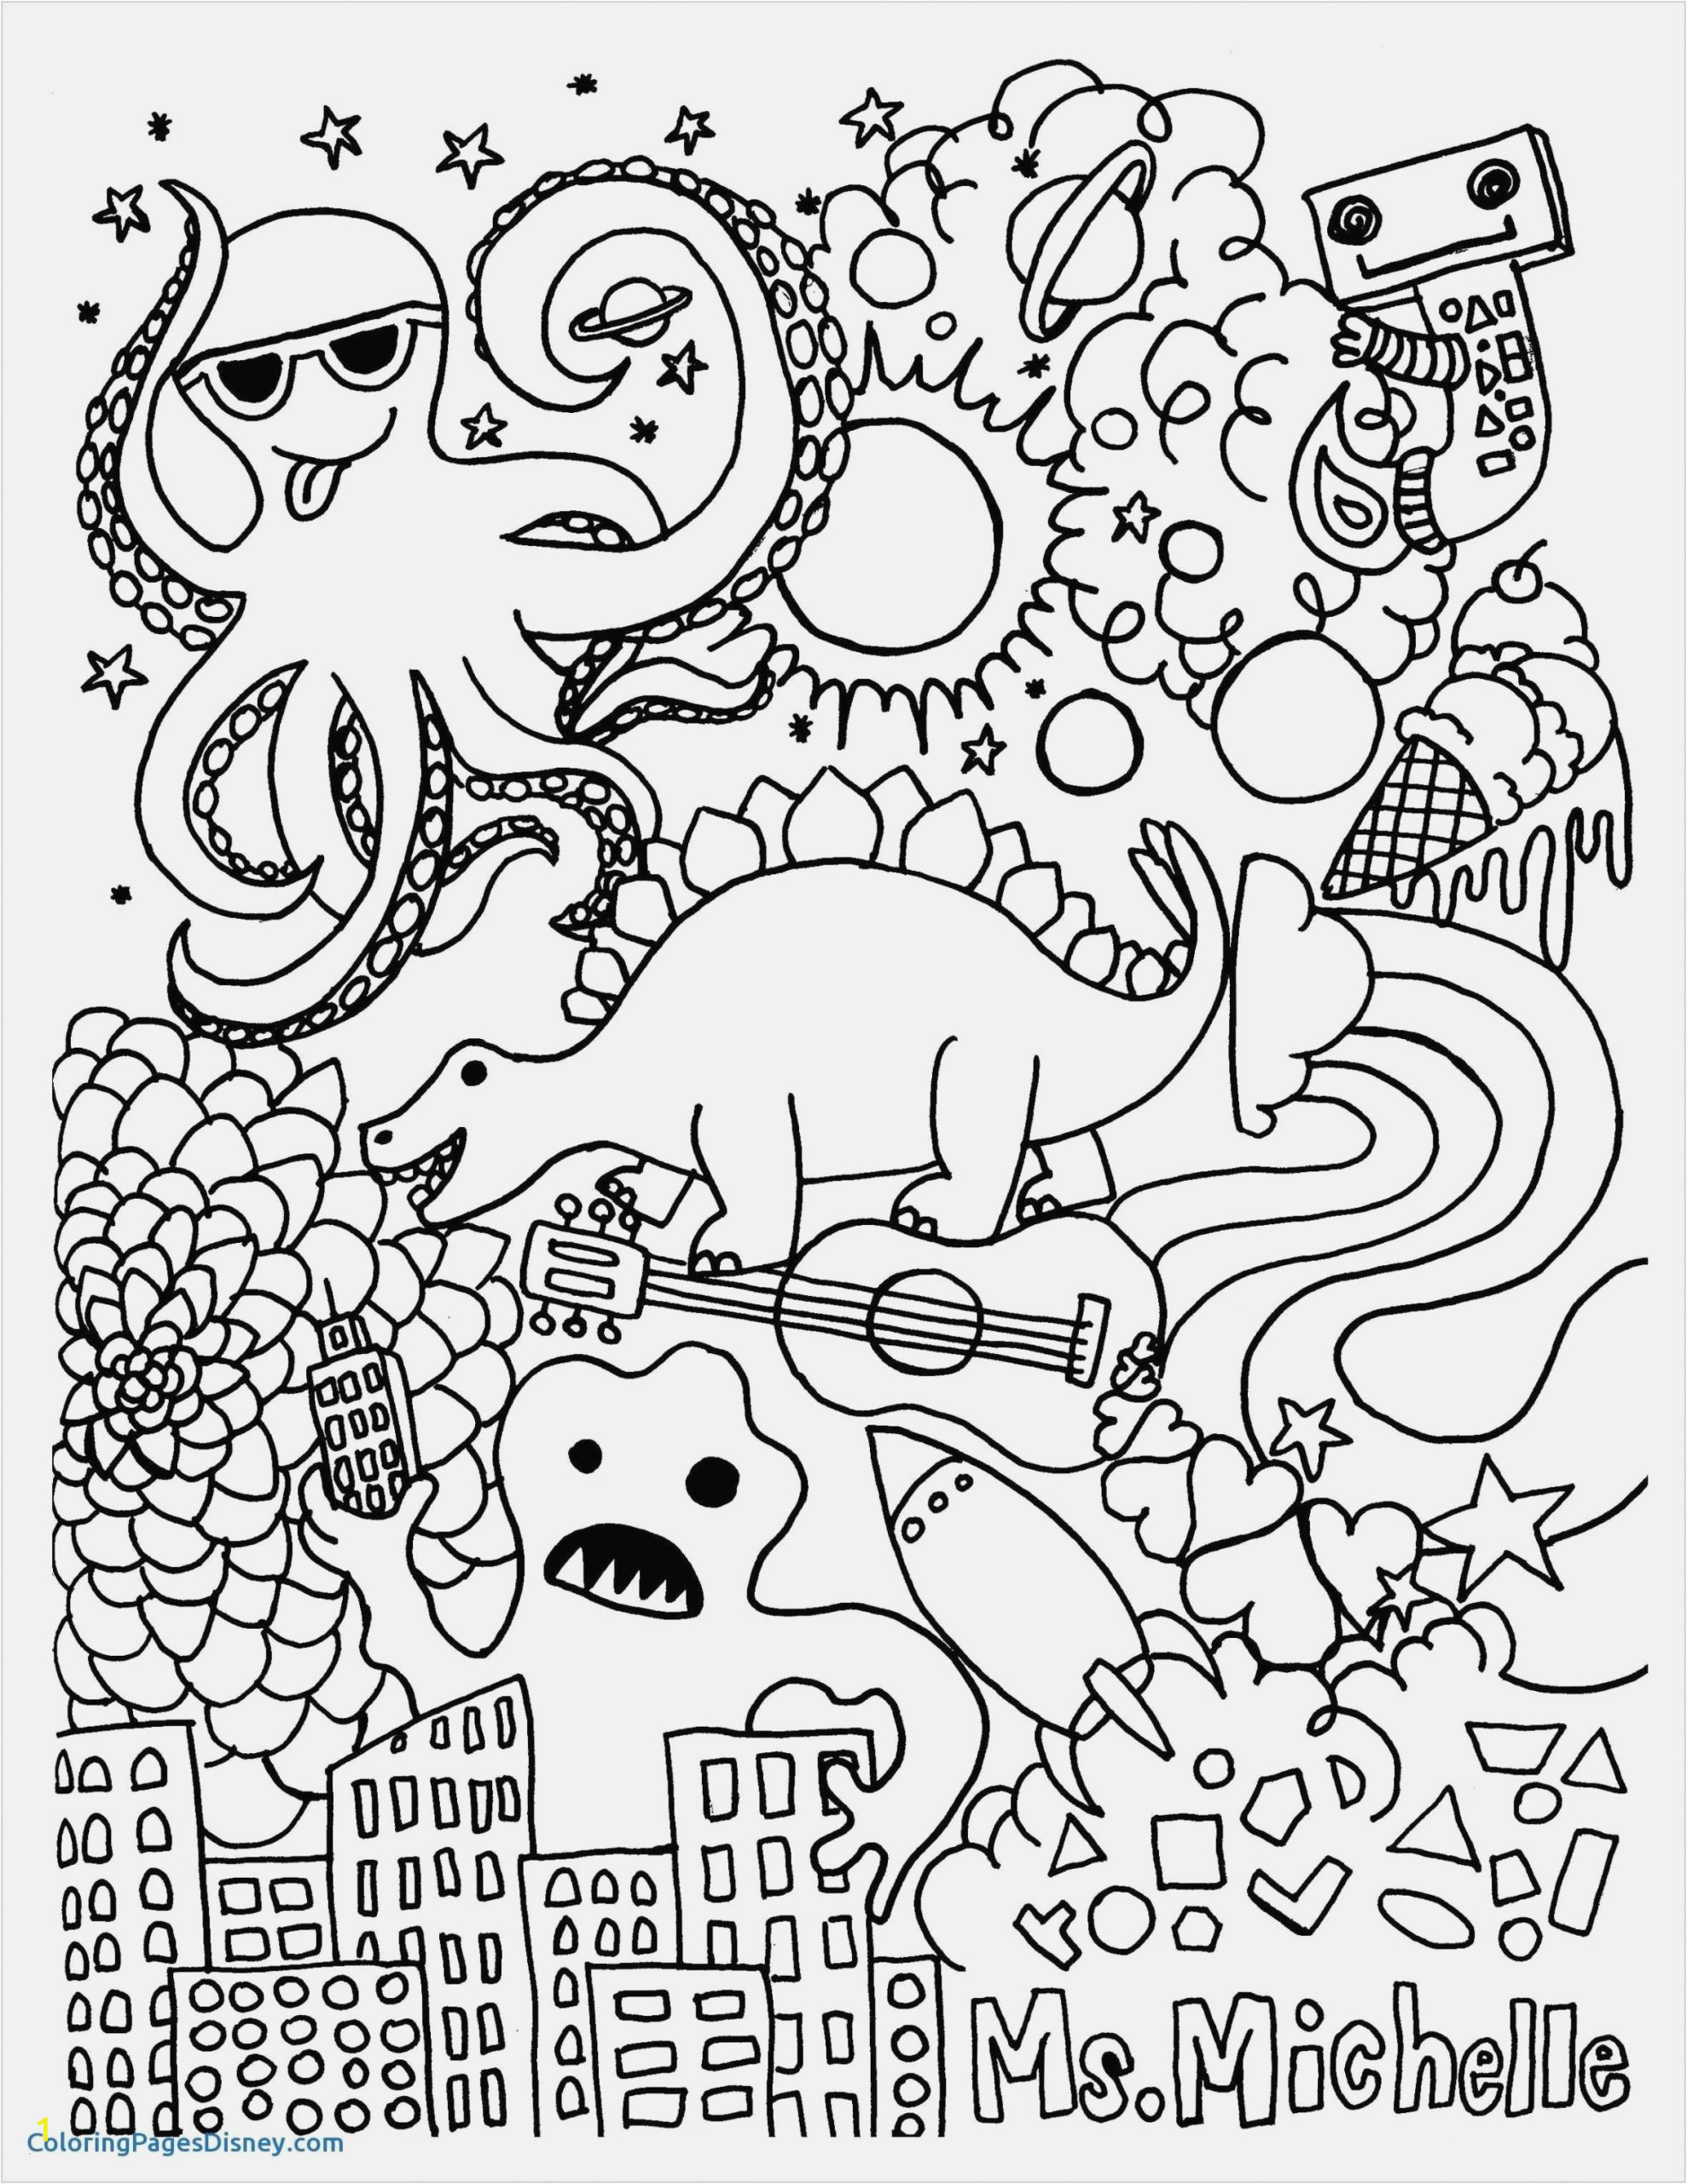 Free Halloween Color Pages to Print Merry Christmas Printable Coloring Pages at Coloring Pages